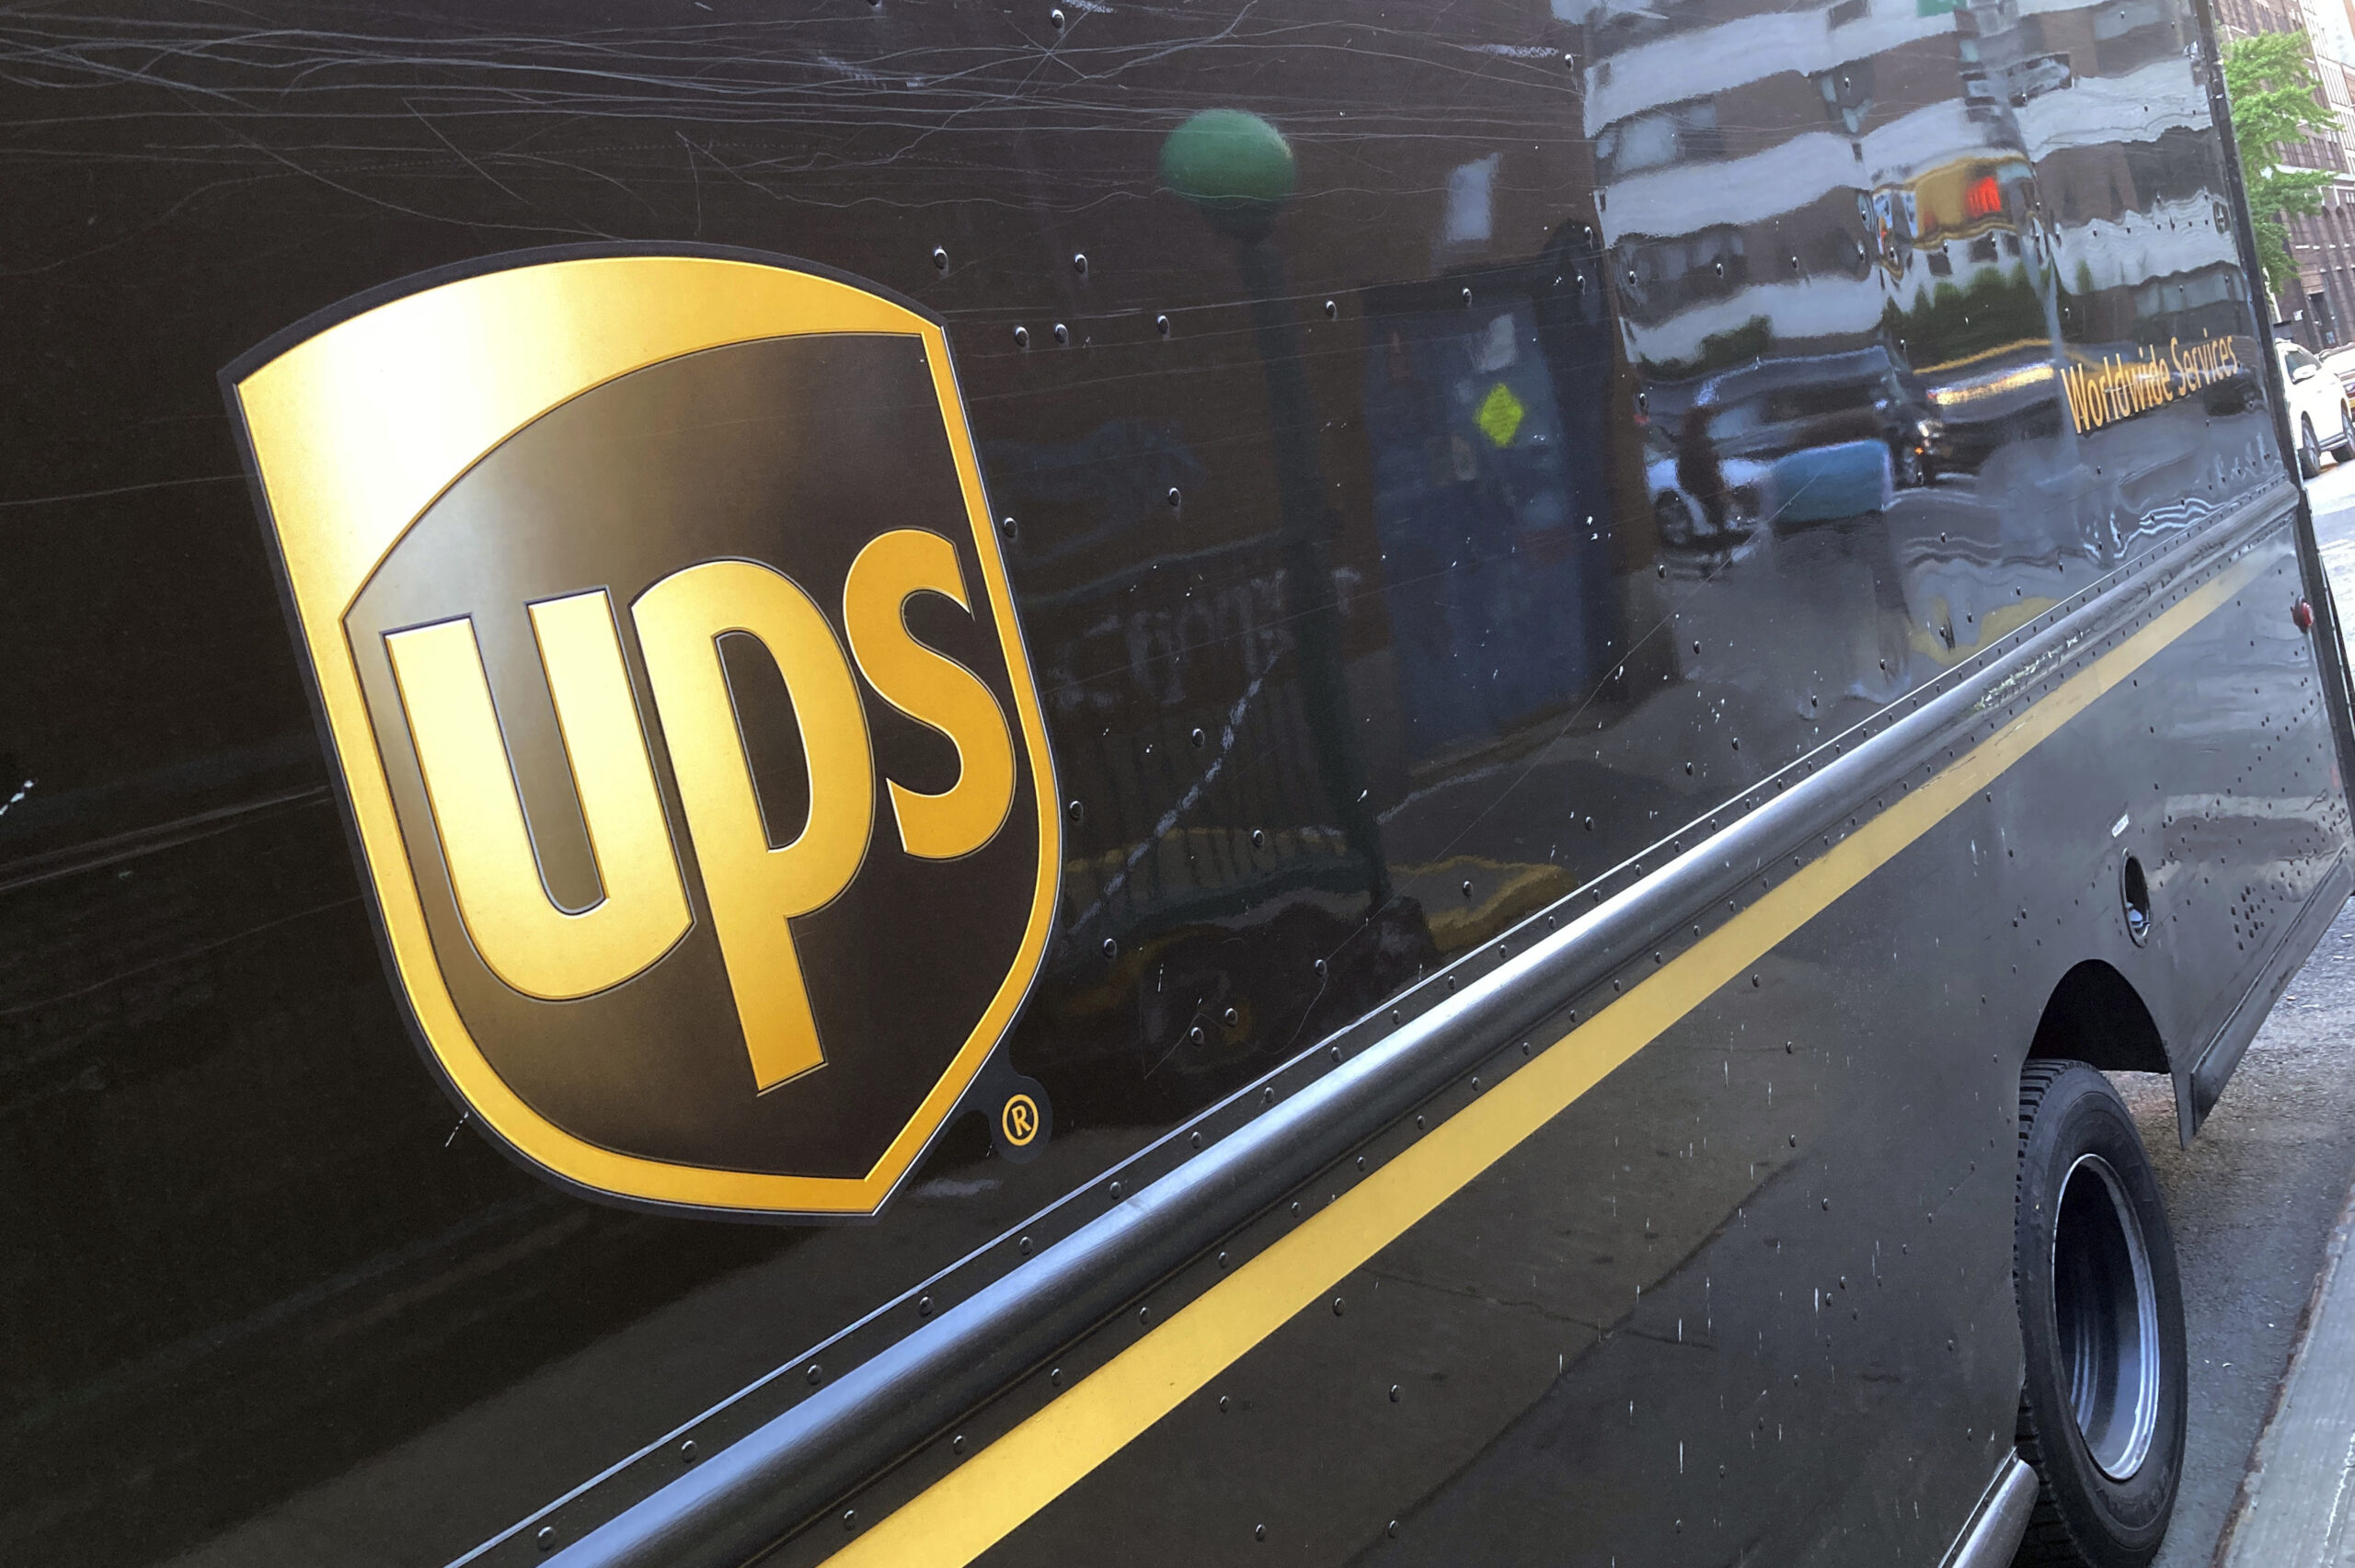 UPS to hire over 100,000